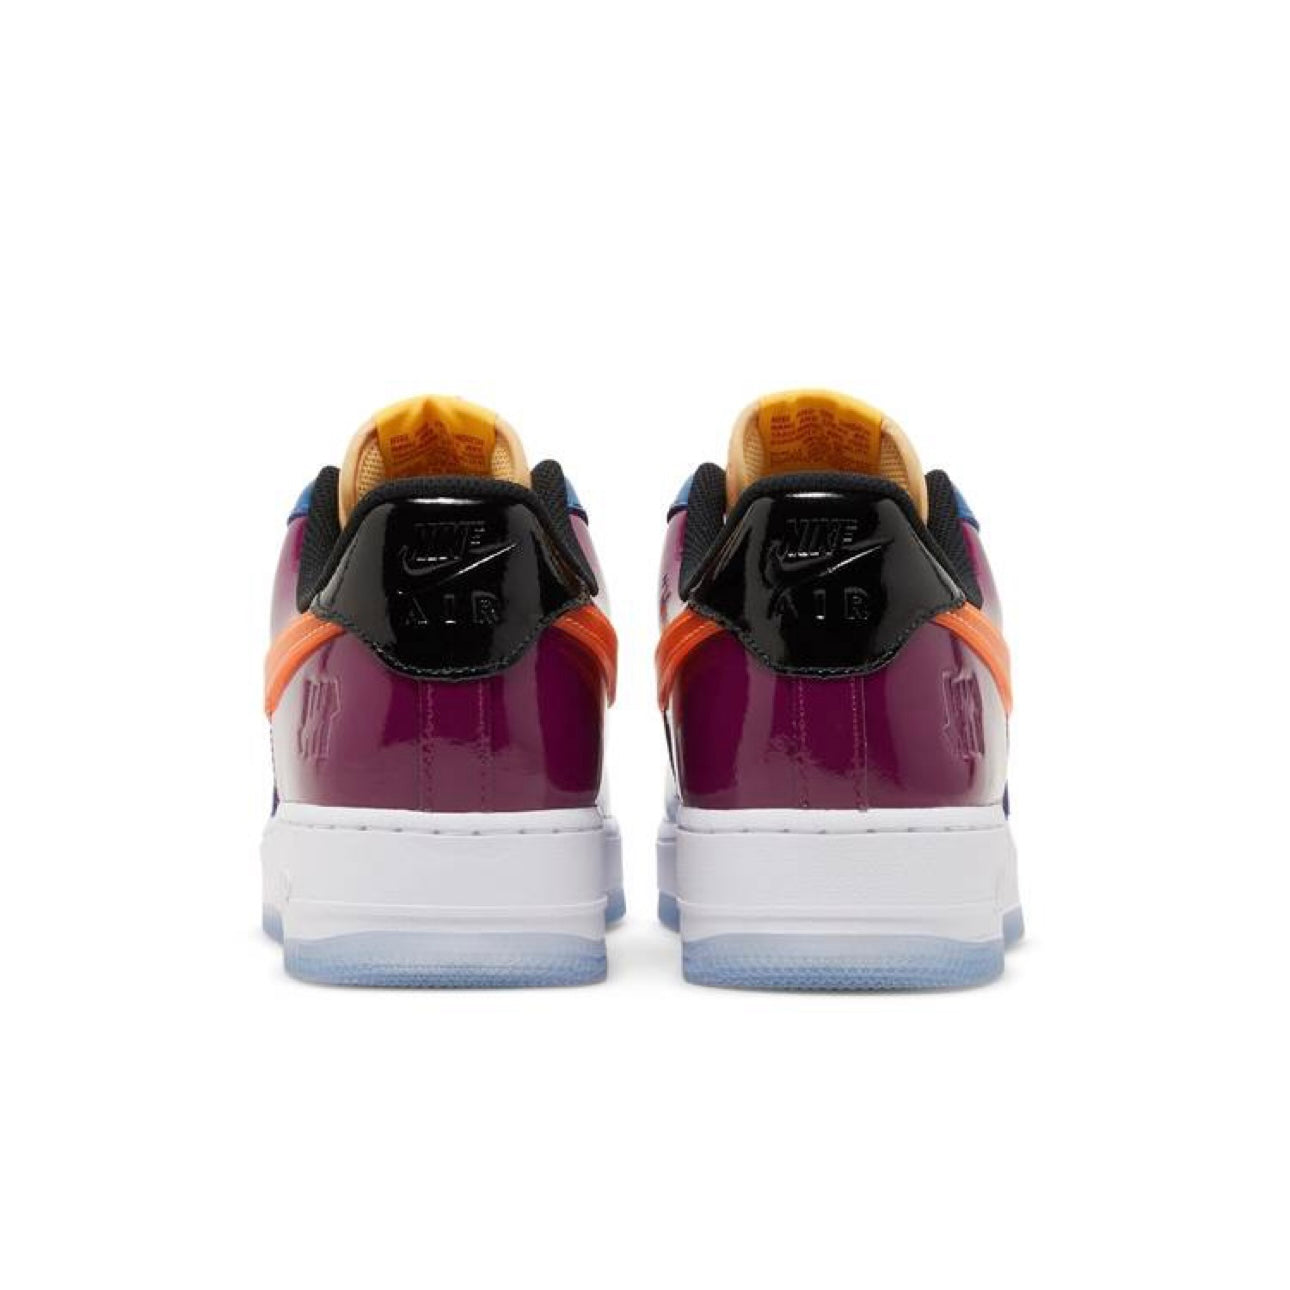 Air Force 1 Low x Undefeated ’Multi Patent/Total Orange’ (Men’s)